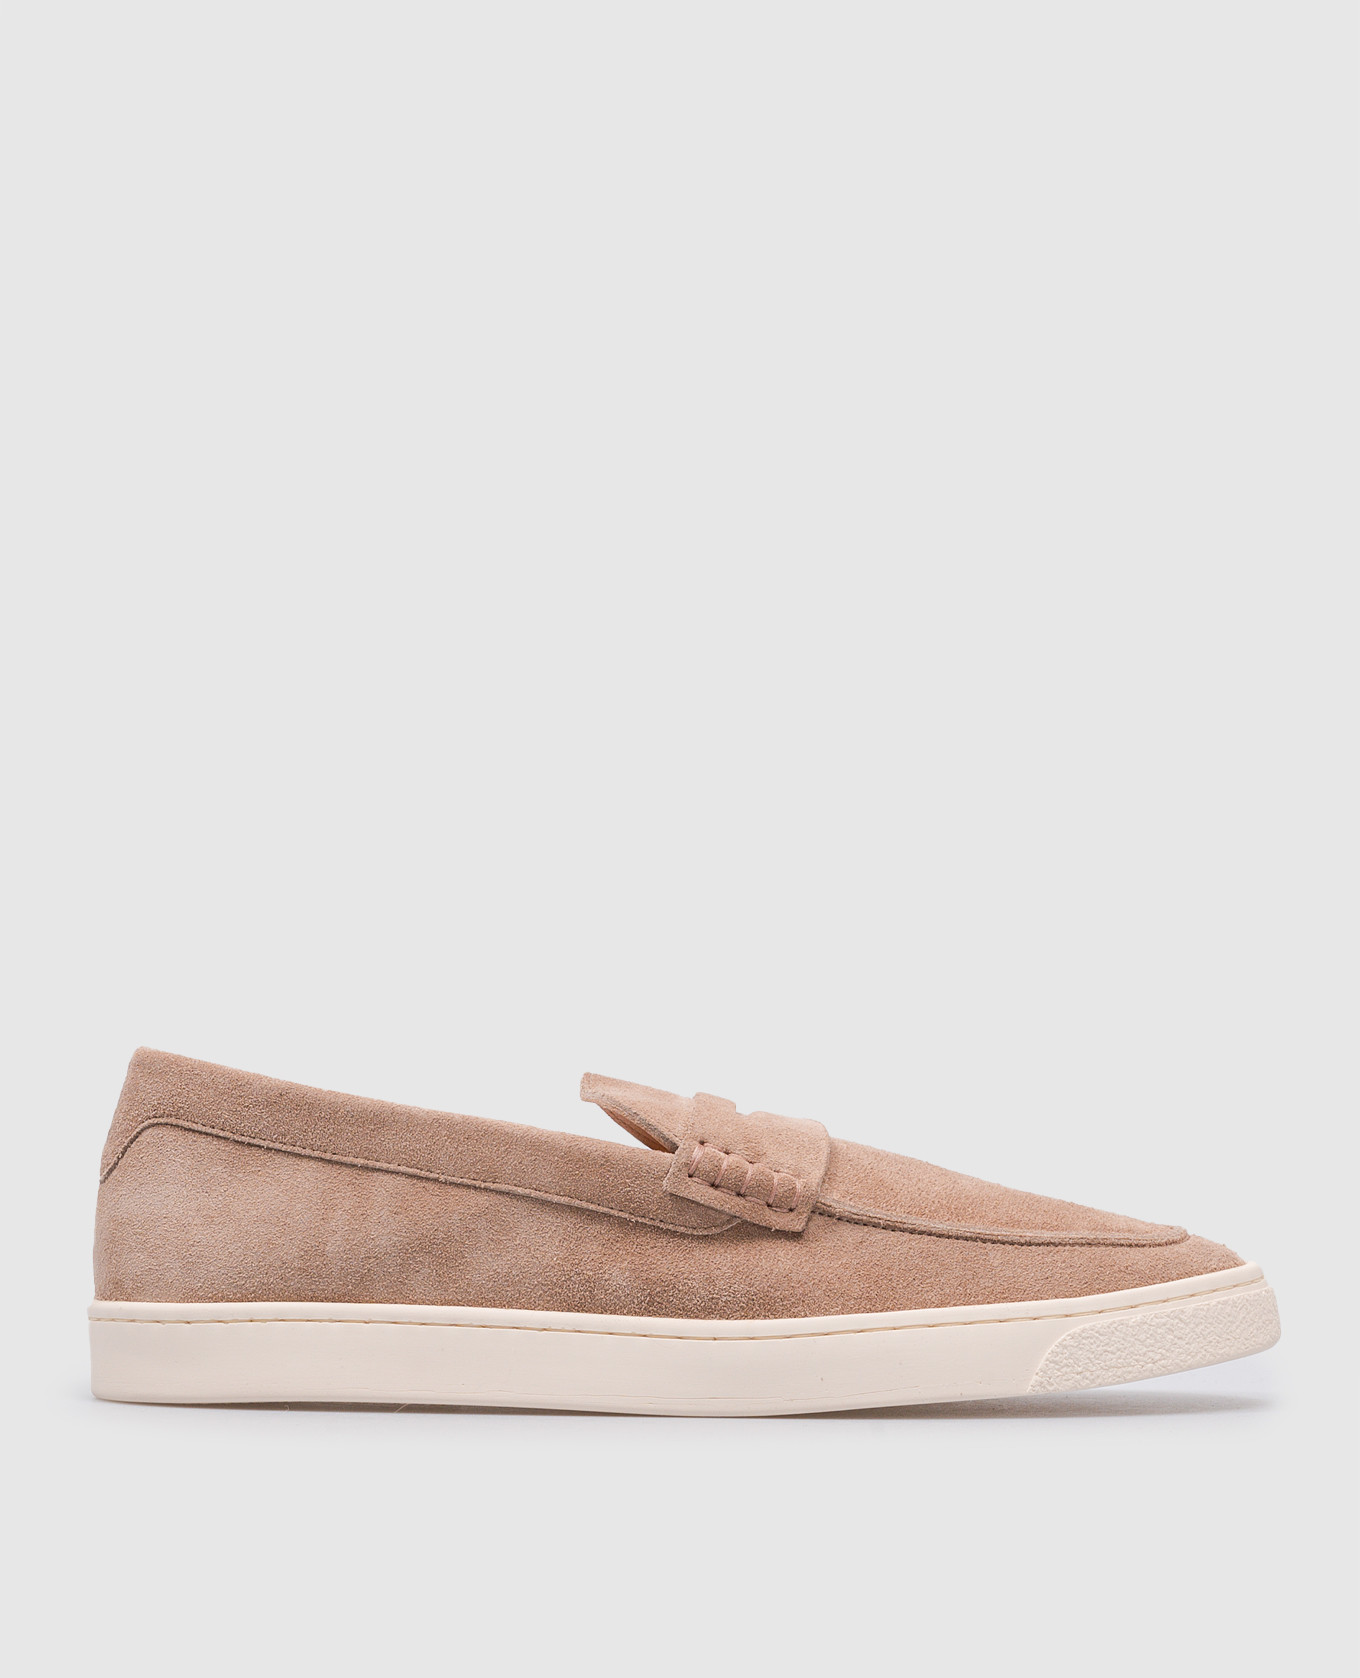 Beige suede loafers with logo